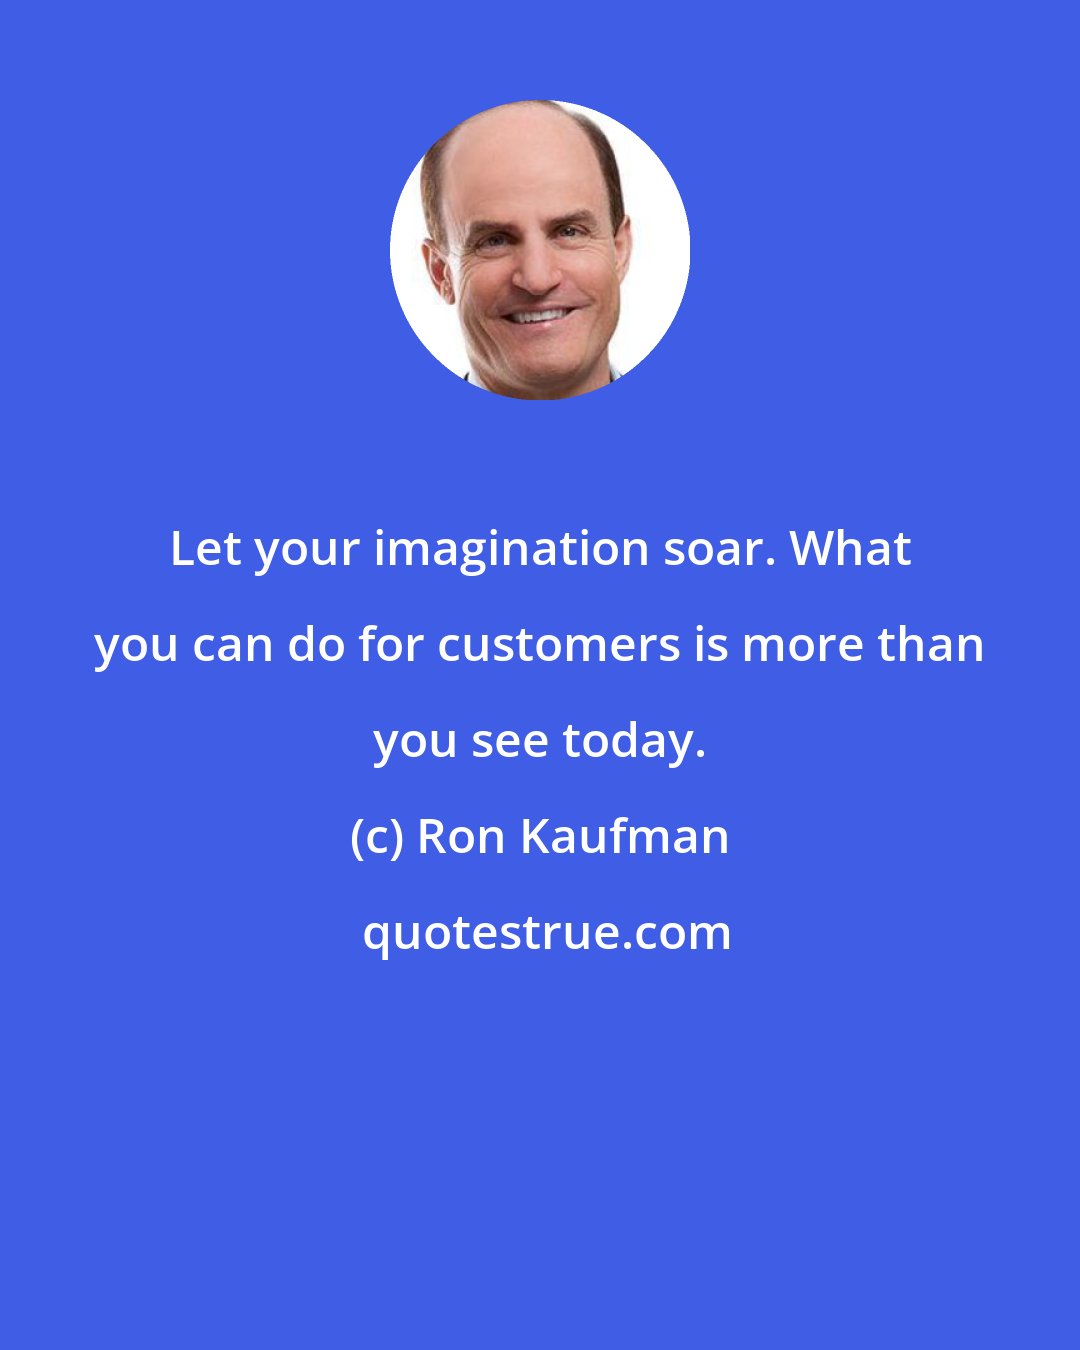 Ron Kaufman: Let your imagination soar. What you can do for customers is more than you see today.